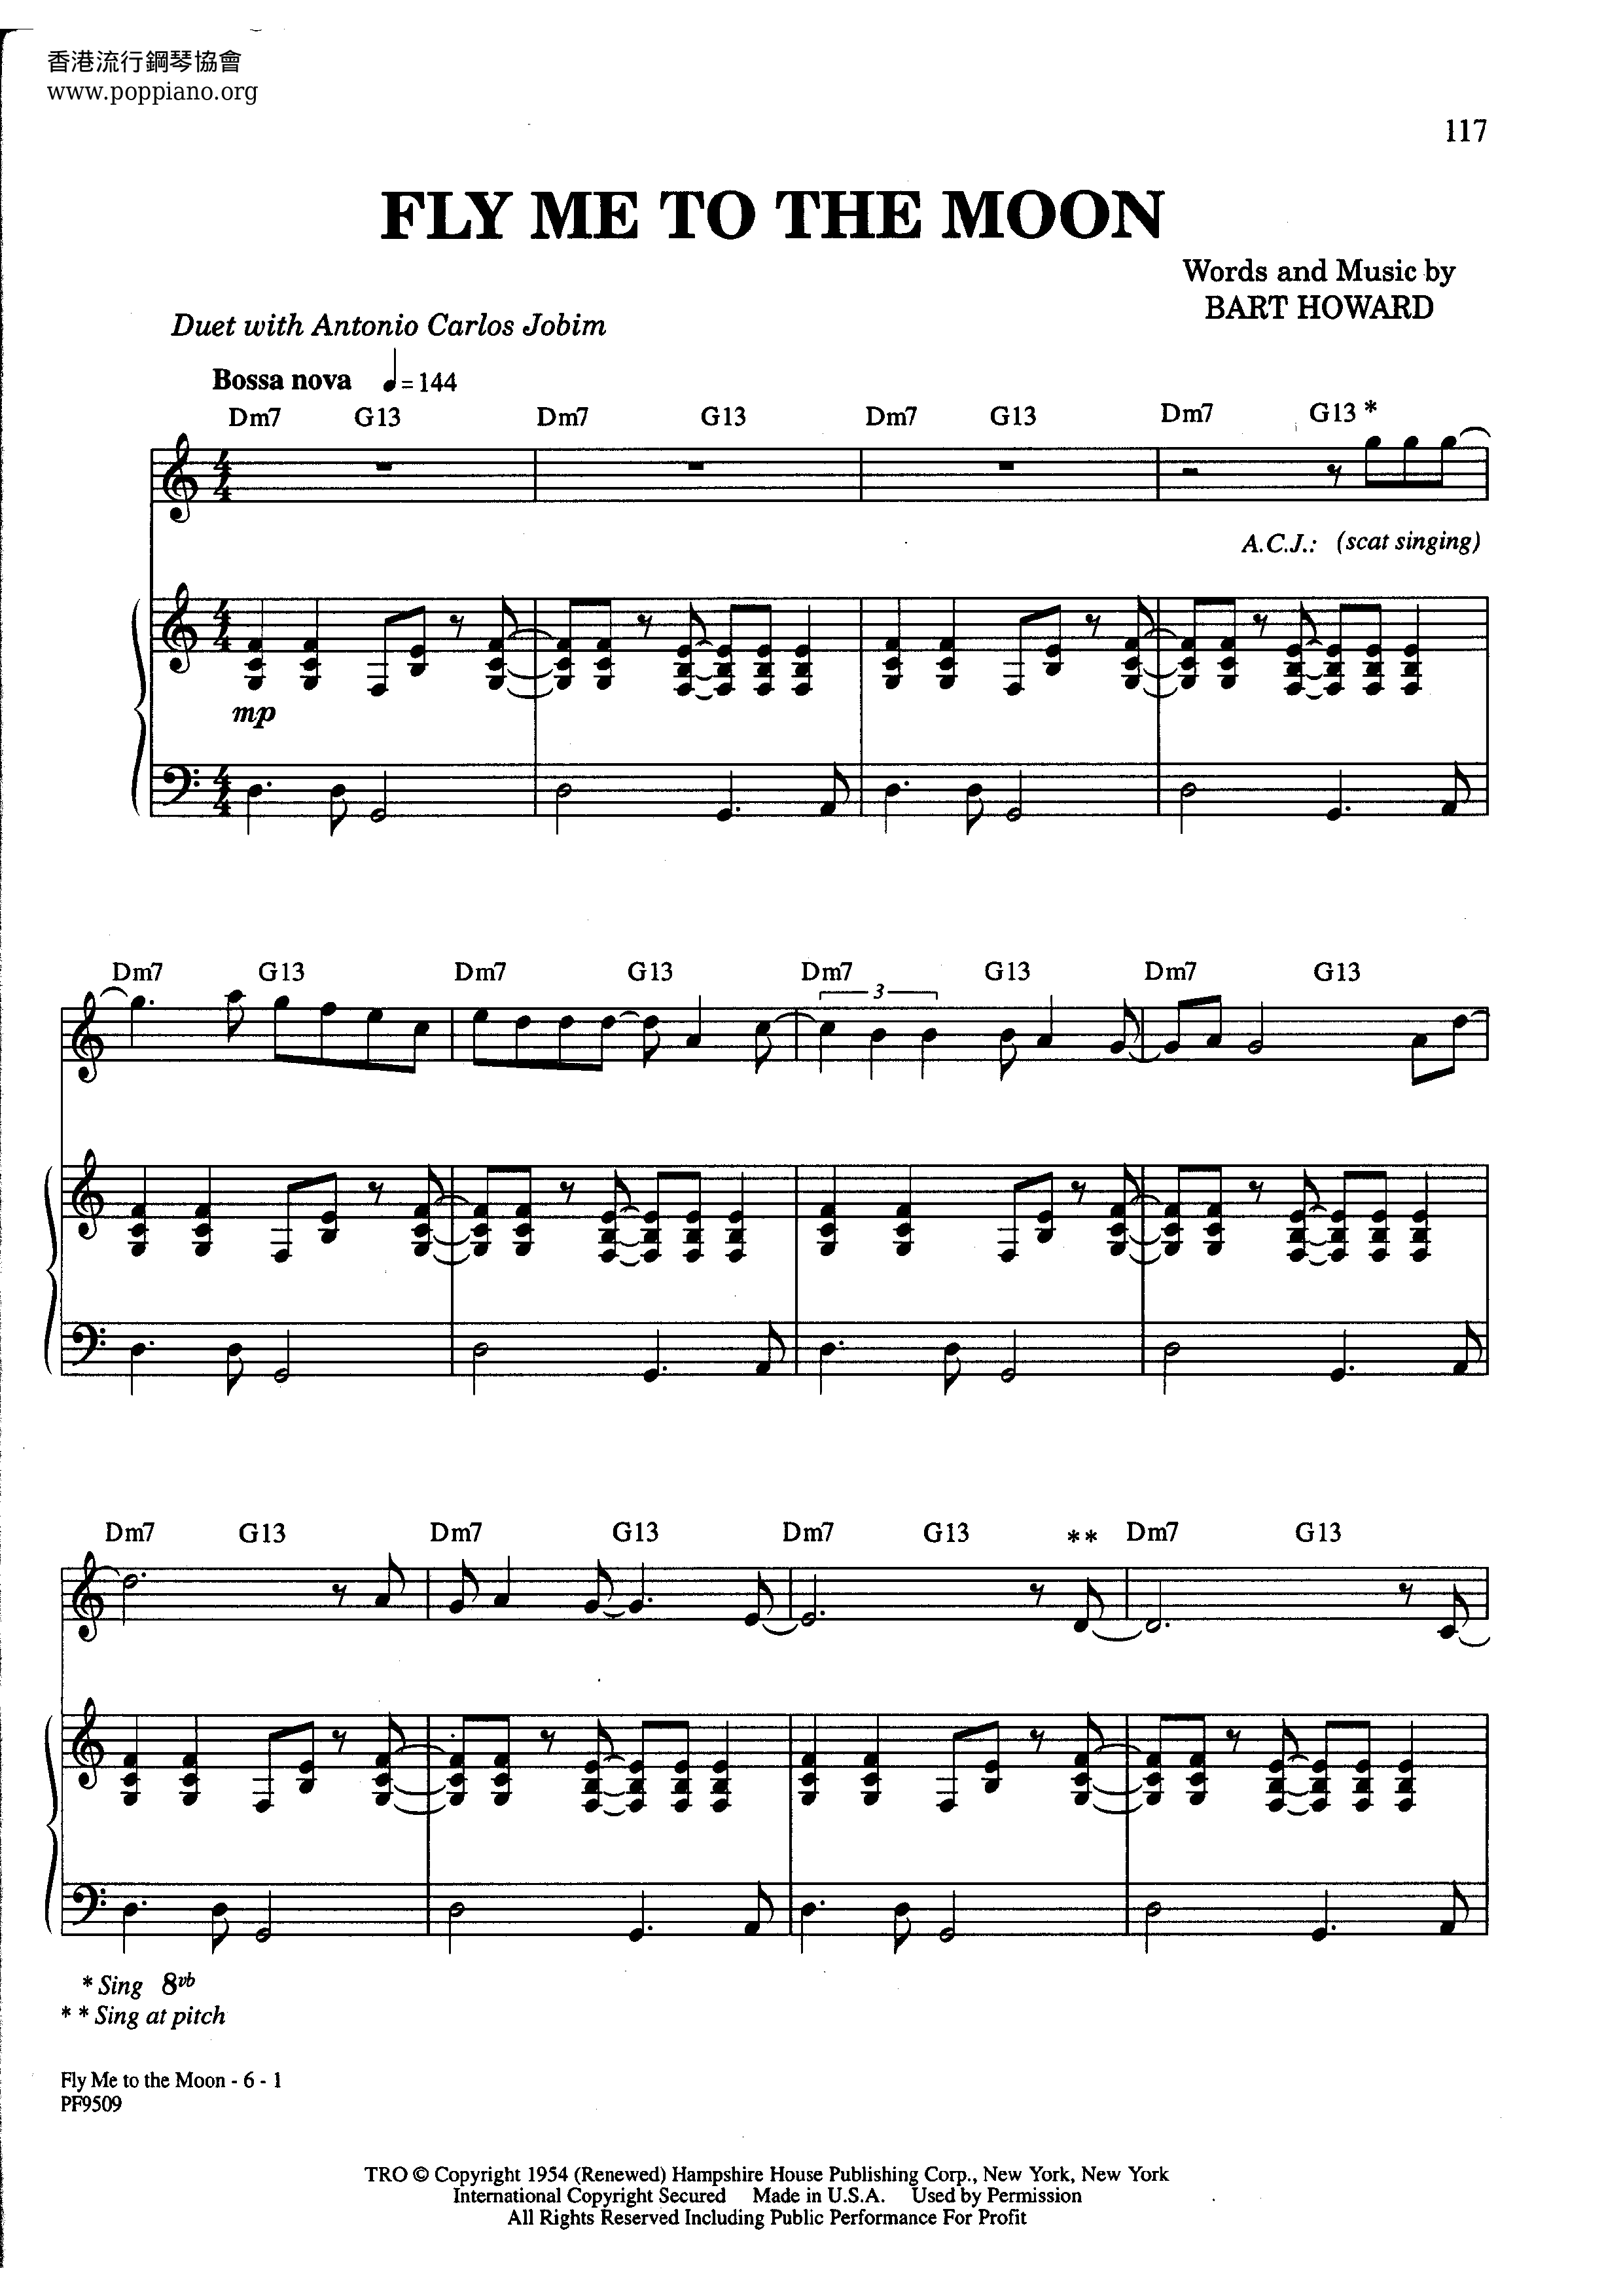 Frank Sinatra Fly Me To The Moon In Other Words Sheet Music Pdf